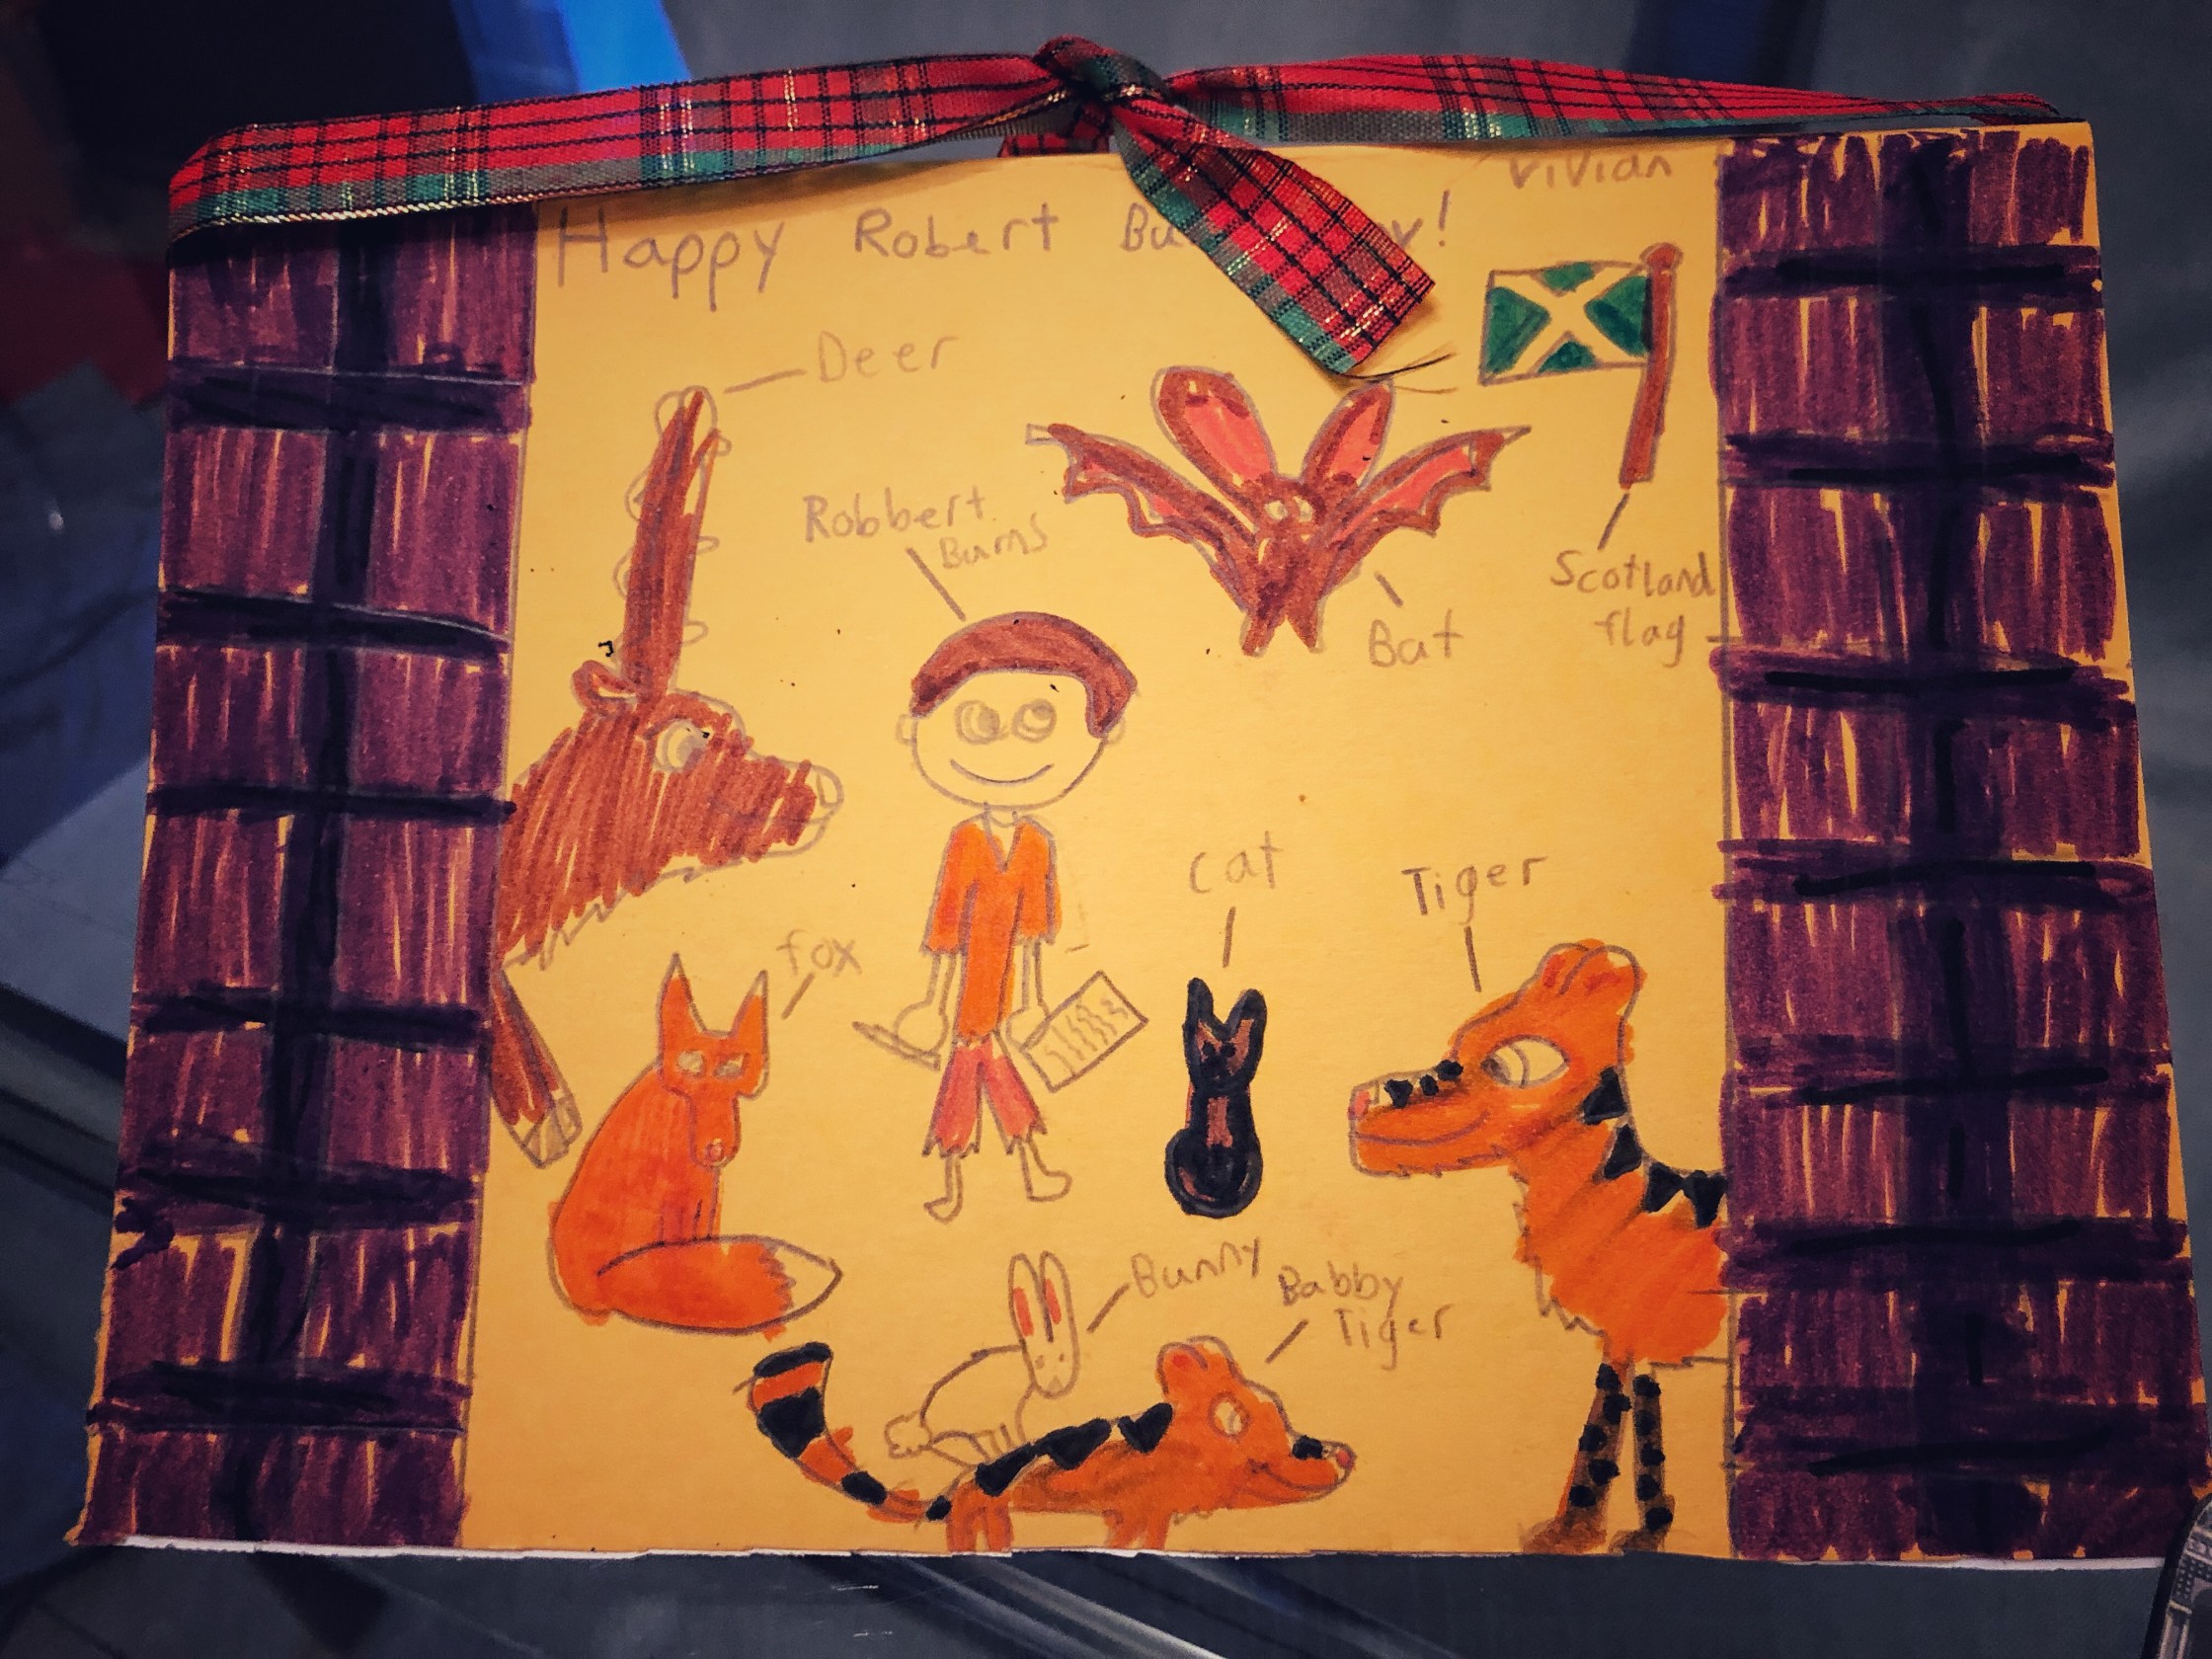 Card with drawings of Robert Burns and animals